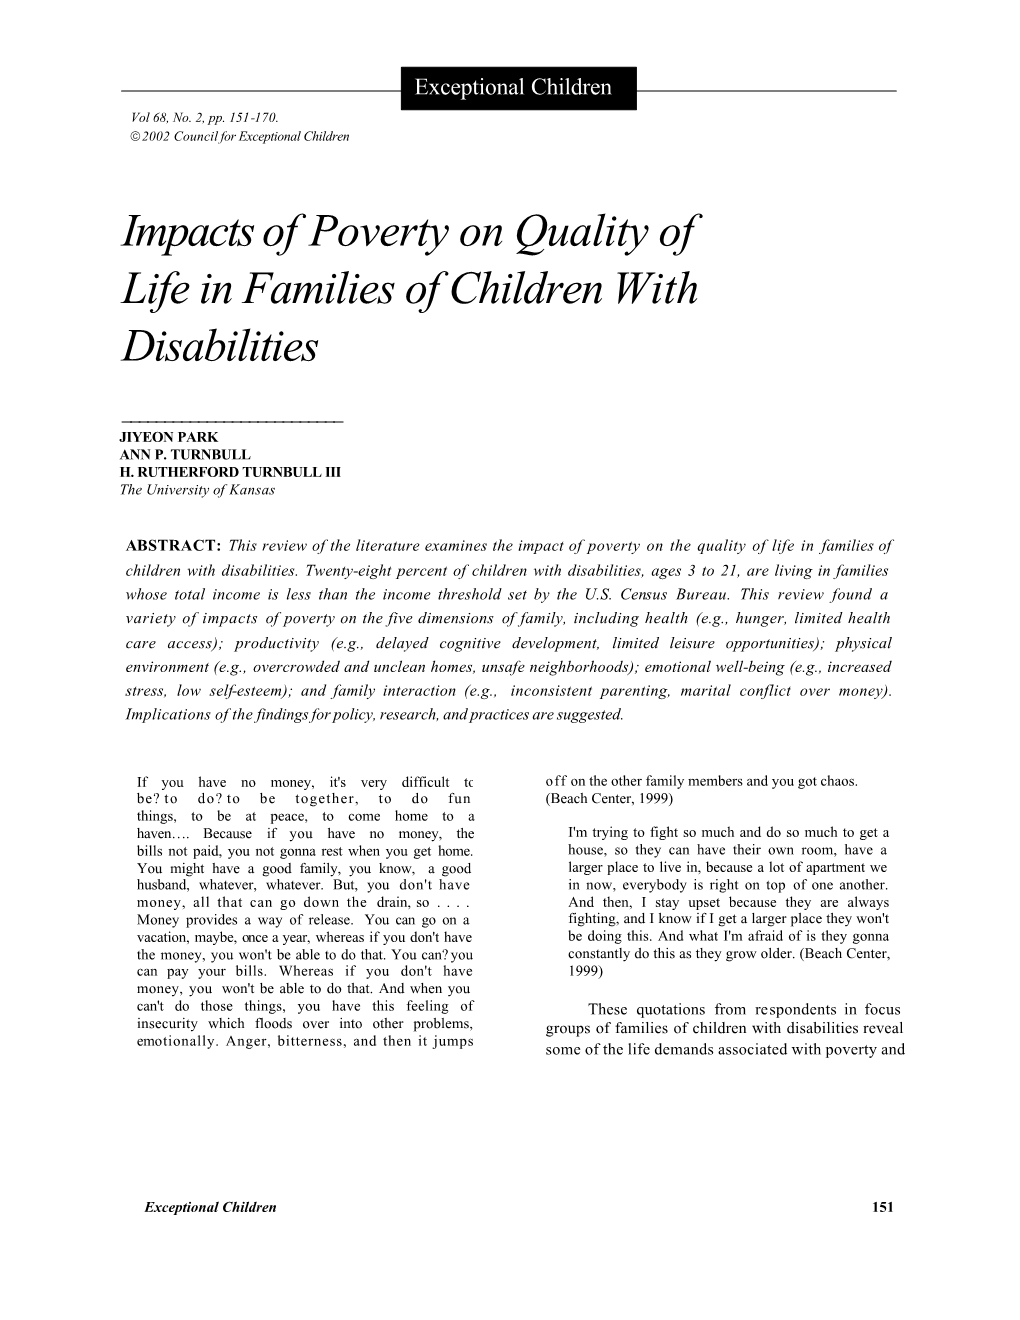 Impacts of Poverty on Quality of Life in Families of Children with Disabilities